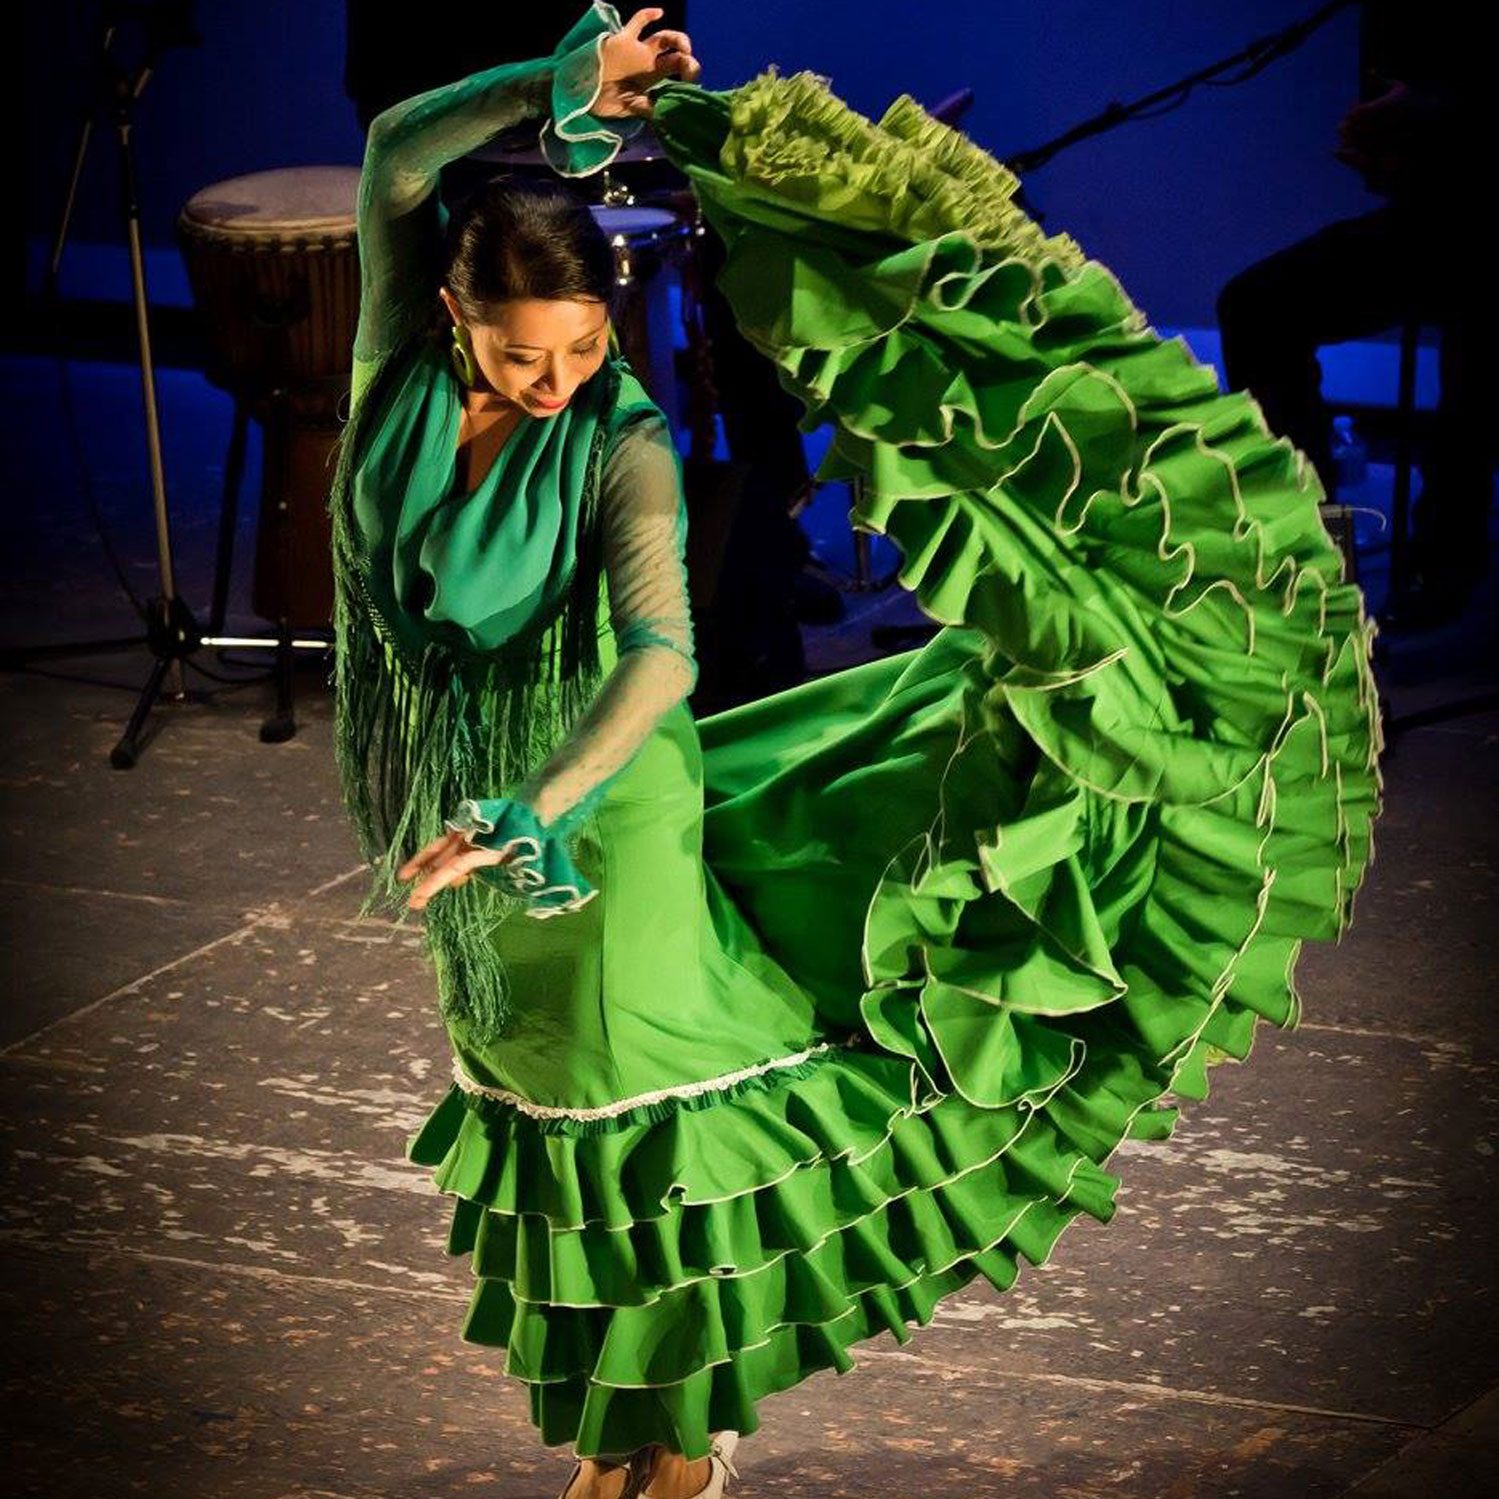 A flamenco dance artist posest on a stage. They are wearing a green traditional Flamenco dress with a long ruffled skirt. They are holding the skirt up above their head with their right hand and are looking down at the left arm which is slightly extended.